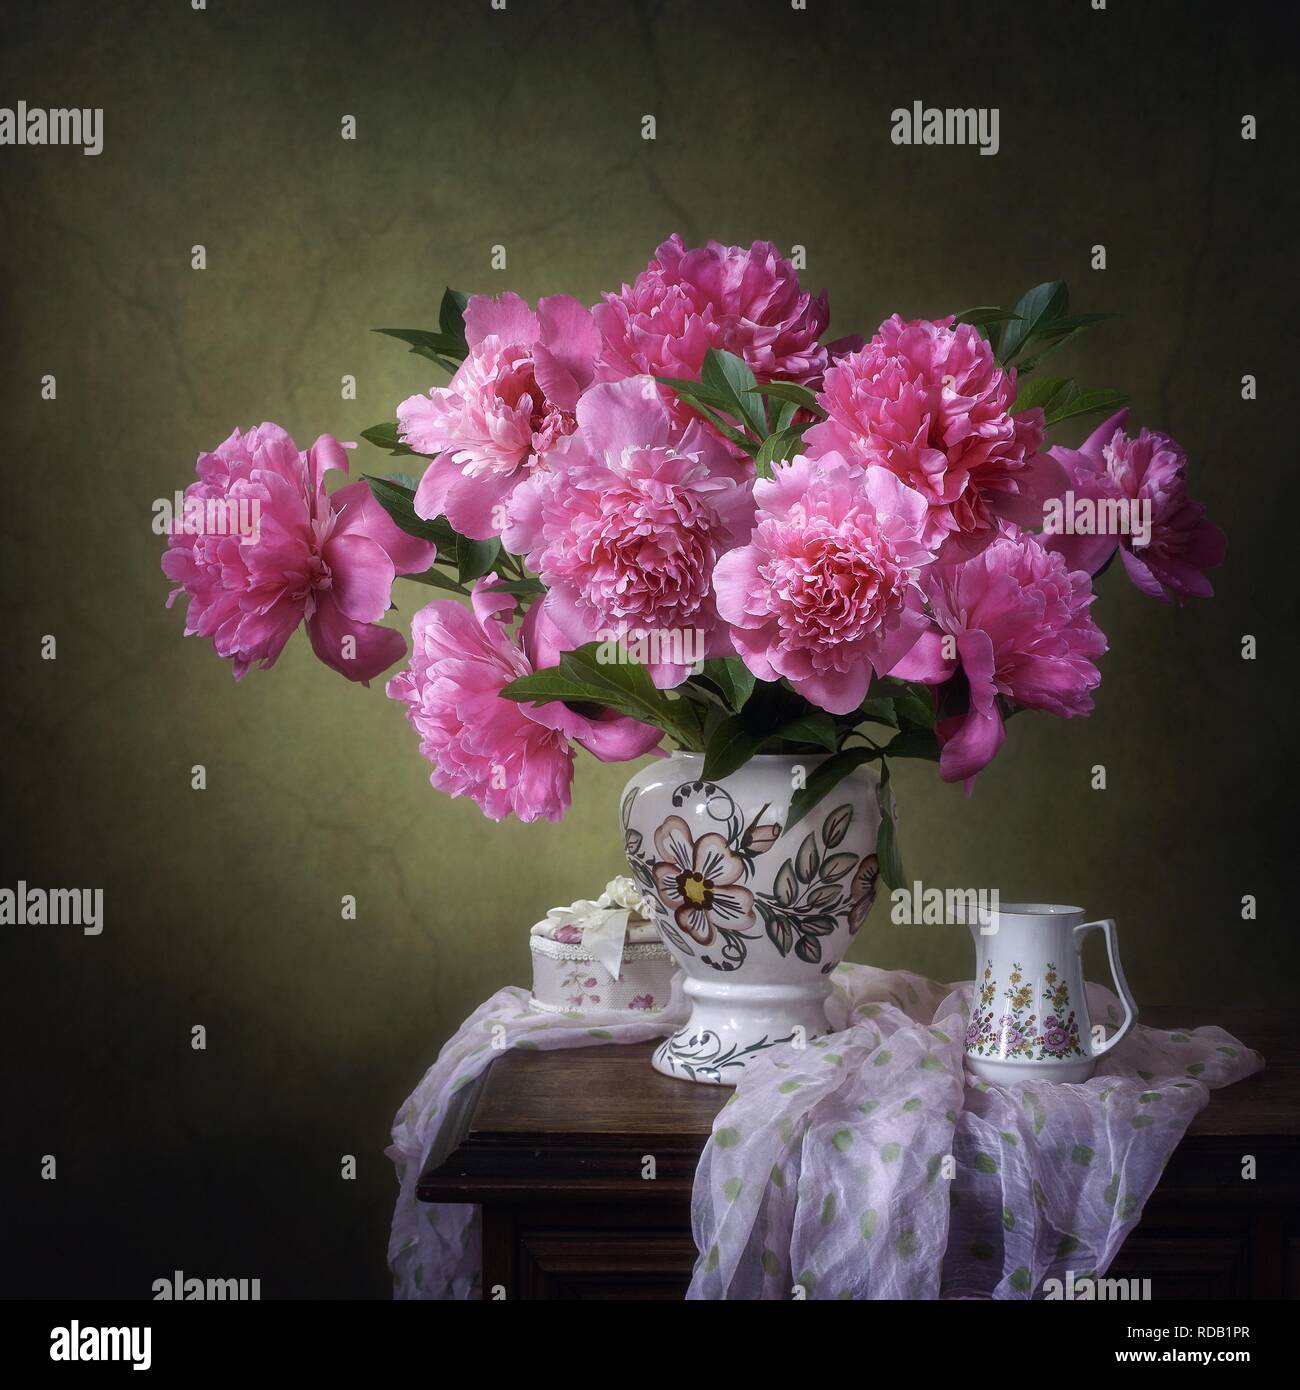 Still life with bouquet of pink peonies Stock Photo - Alamy